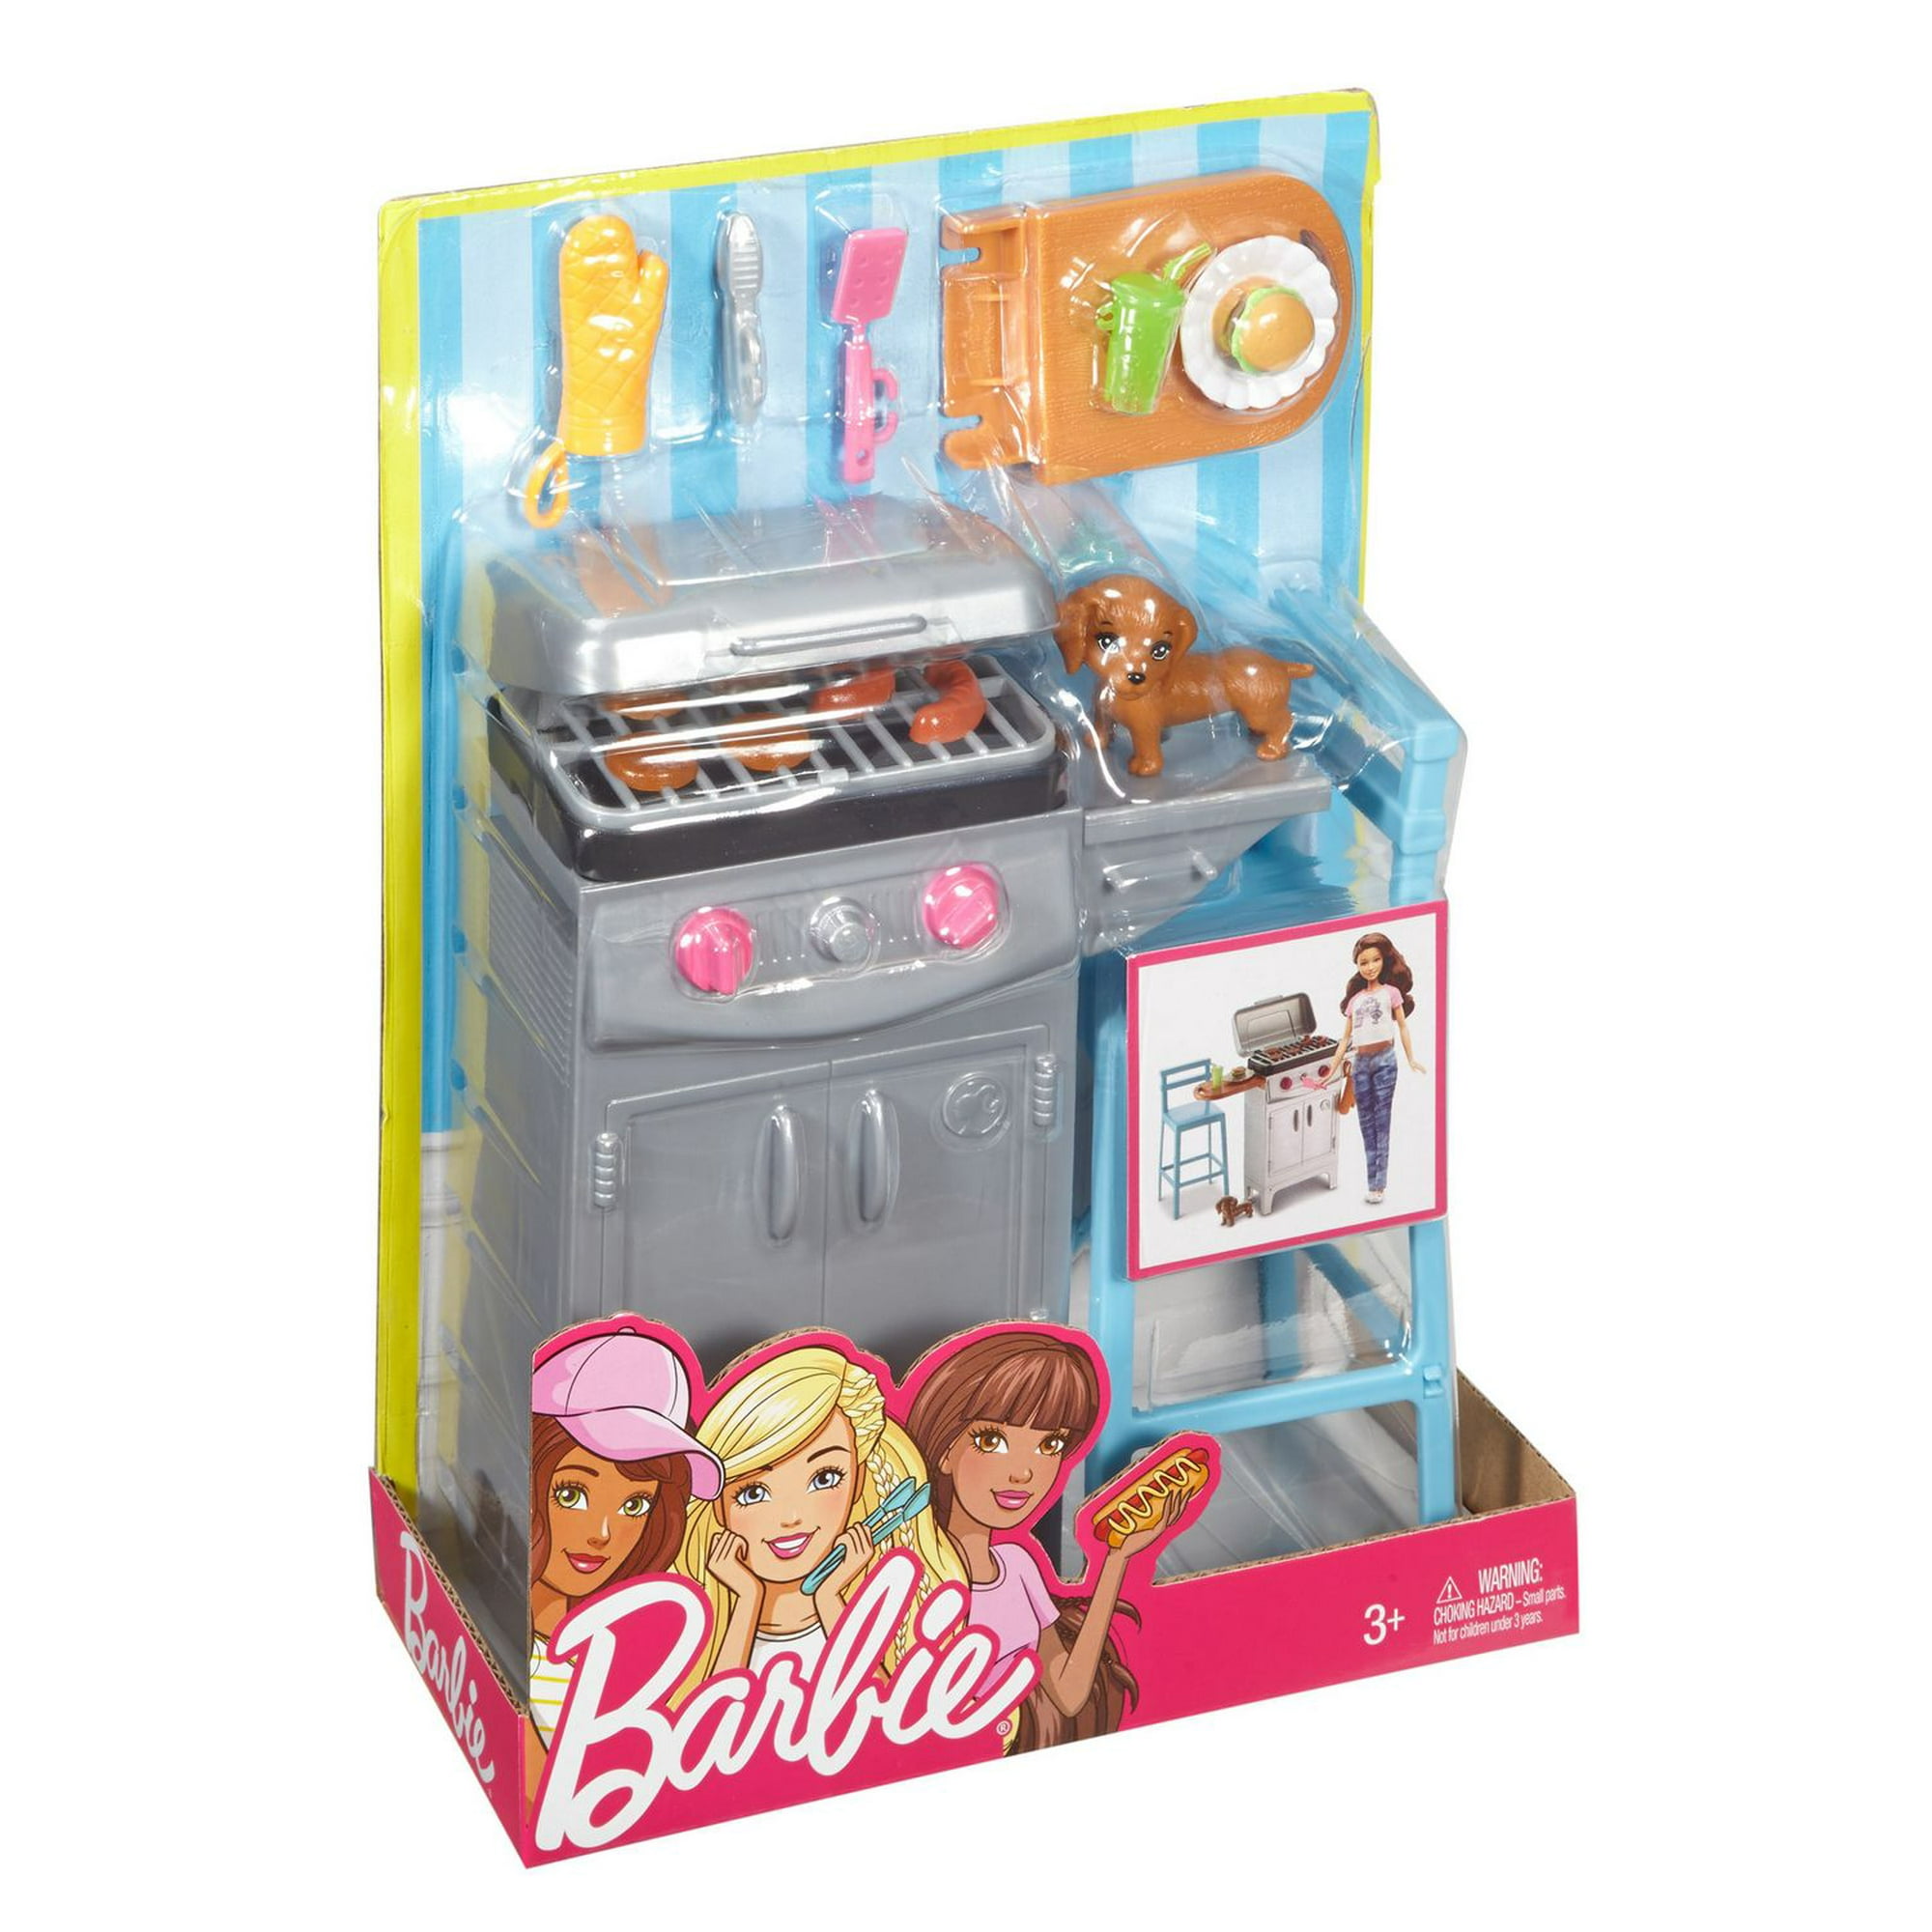  Barbie Doll & Playset, Cook 'n Grill Restaurant with Pizza Oven  & 30+ Pieces Including Furniture & Kitchen Accessories : Toys & Games